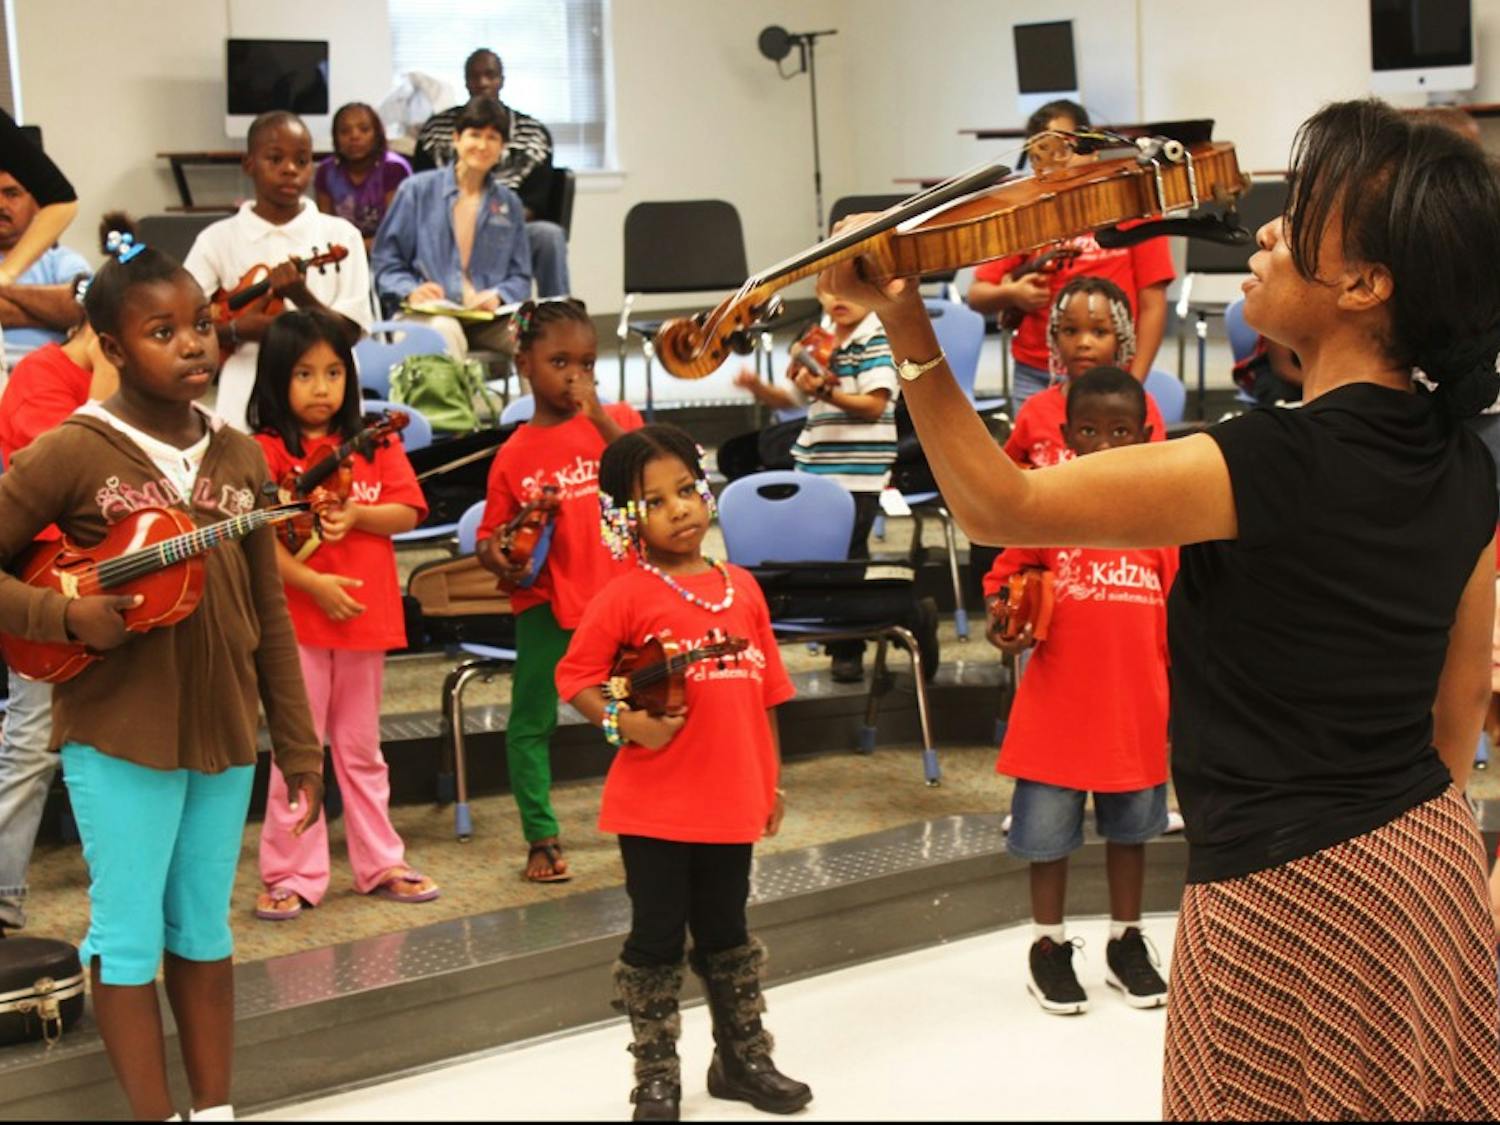 Tonya Suggs, the string orchestra educator at Wake County Public Schools, demonstrates the proper technique for holding a violin as part of the KidZNotes program to give needy children musical training.